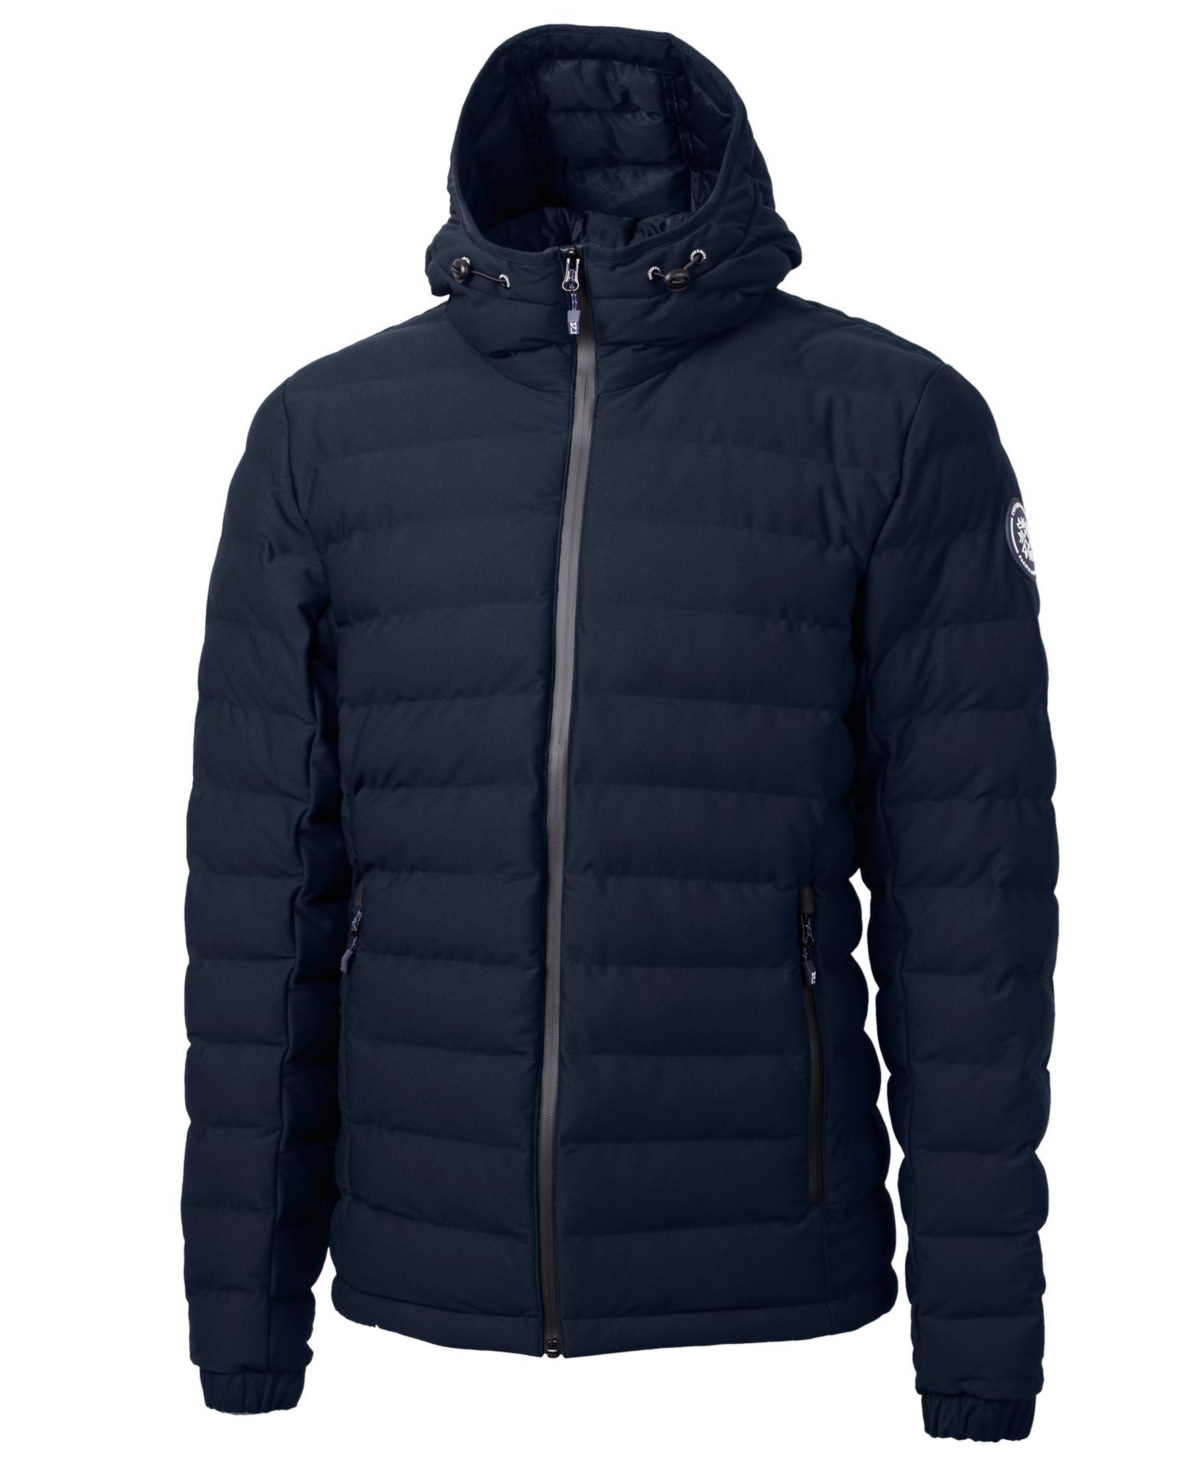 Mission Ridge Repreve Eco Insulated Men's Big & Tall Puffer Jacket - Navy Blue